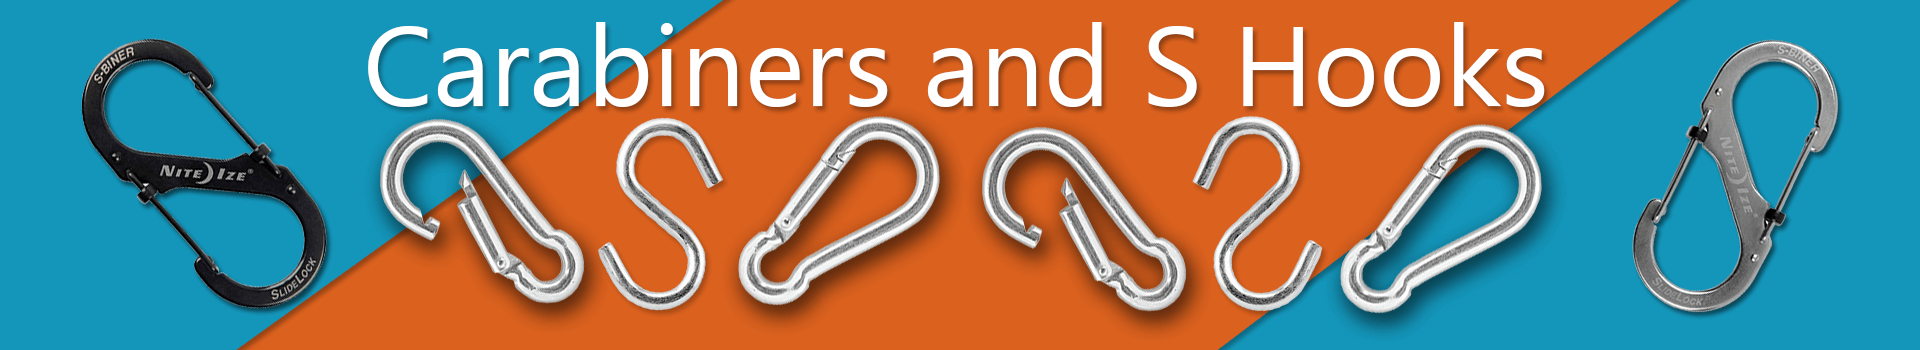 Carabiners and S Hooks